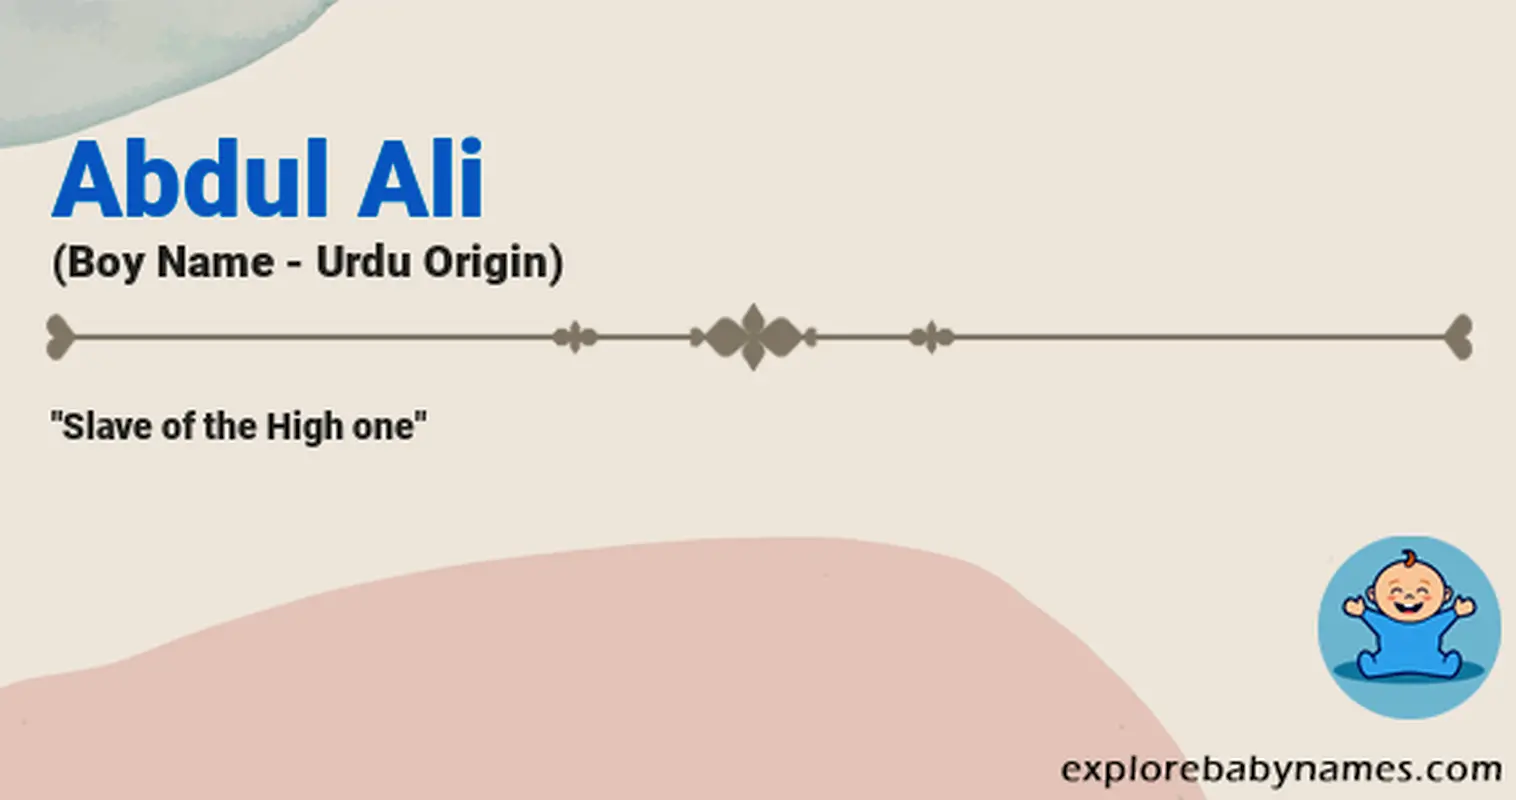 Meaning of Abdul Ali